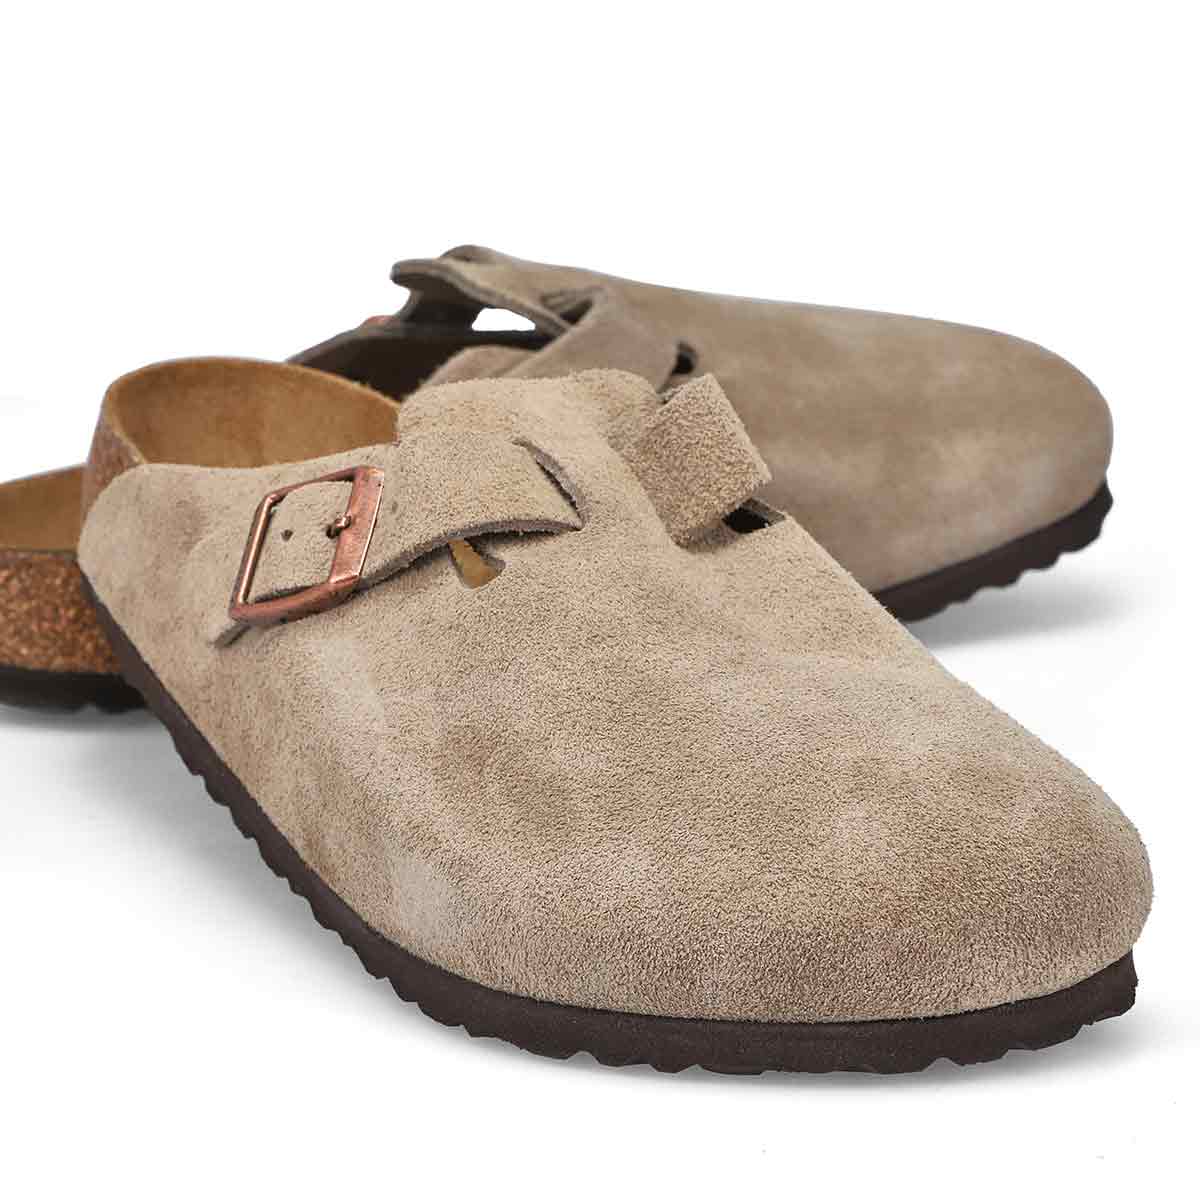 Women's Boston Soft Footbed Clog - Taupe